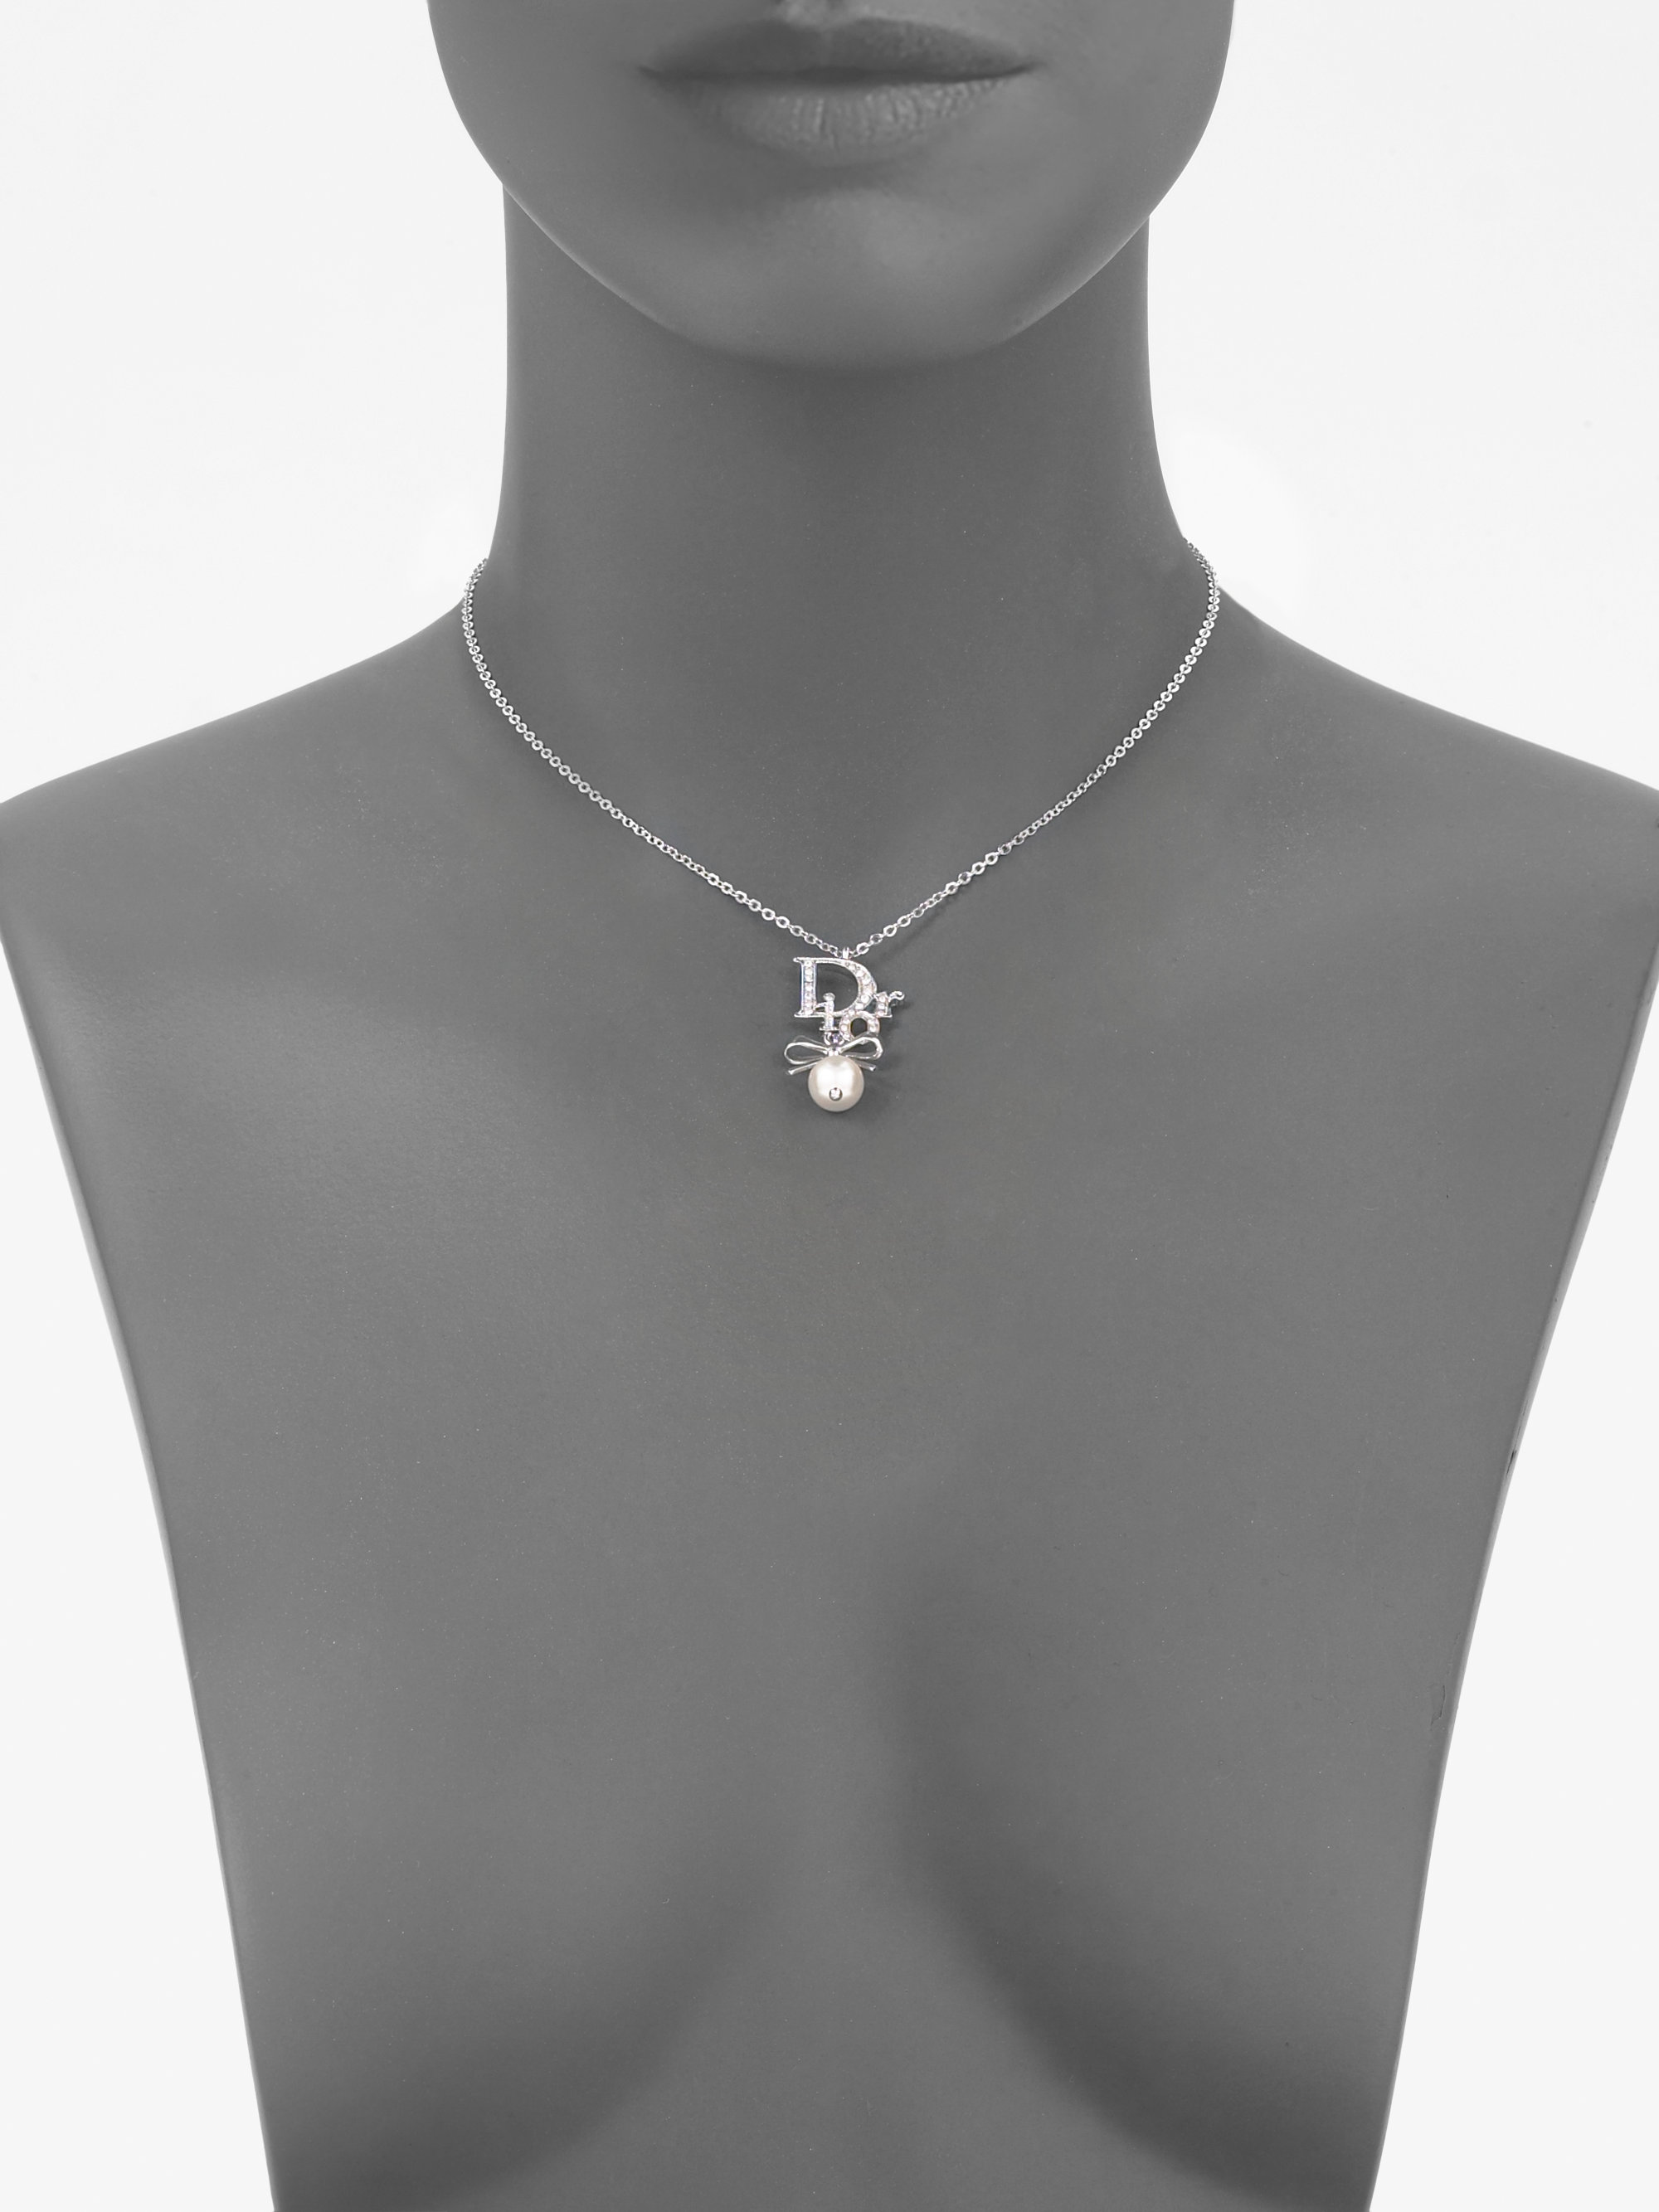 Skur Nybegynder privatliv Dior Logo and Bow Necklace in Metallic | Lyst